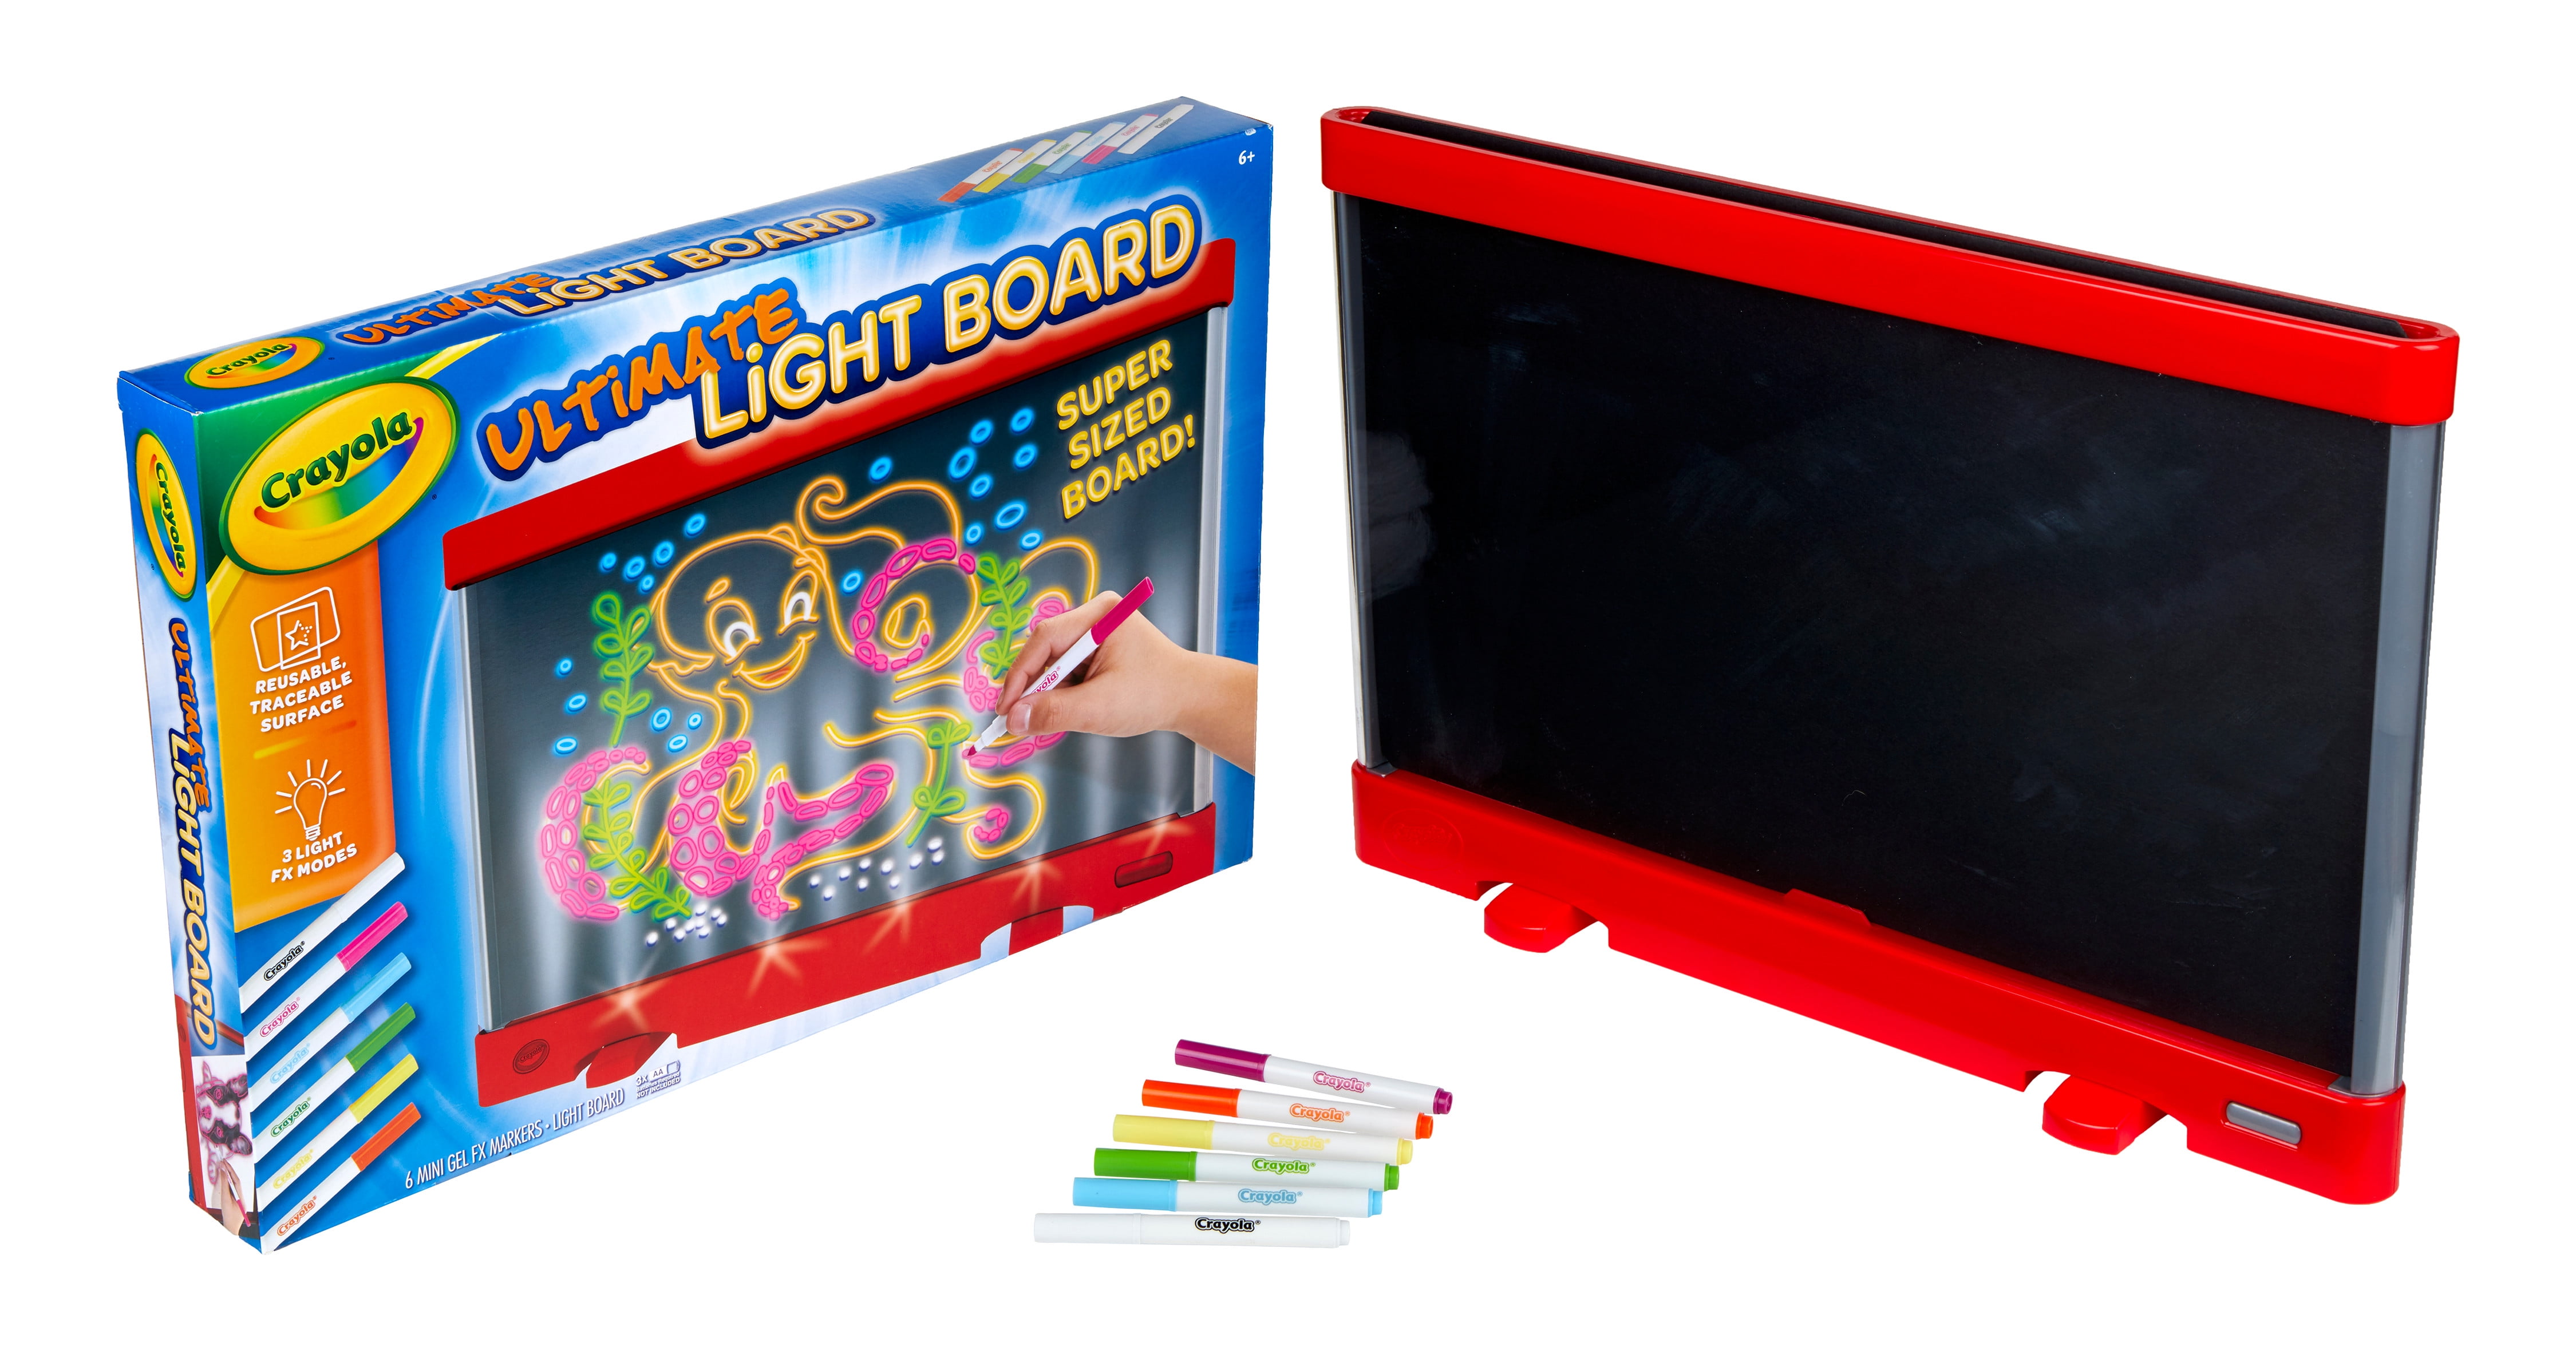 Unboxing: Crayola Ultimate Light Board